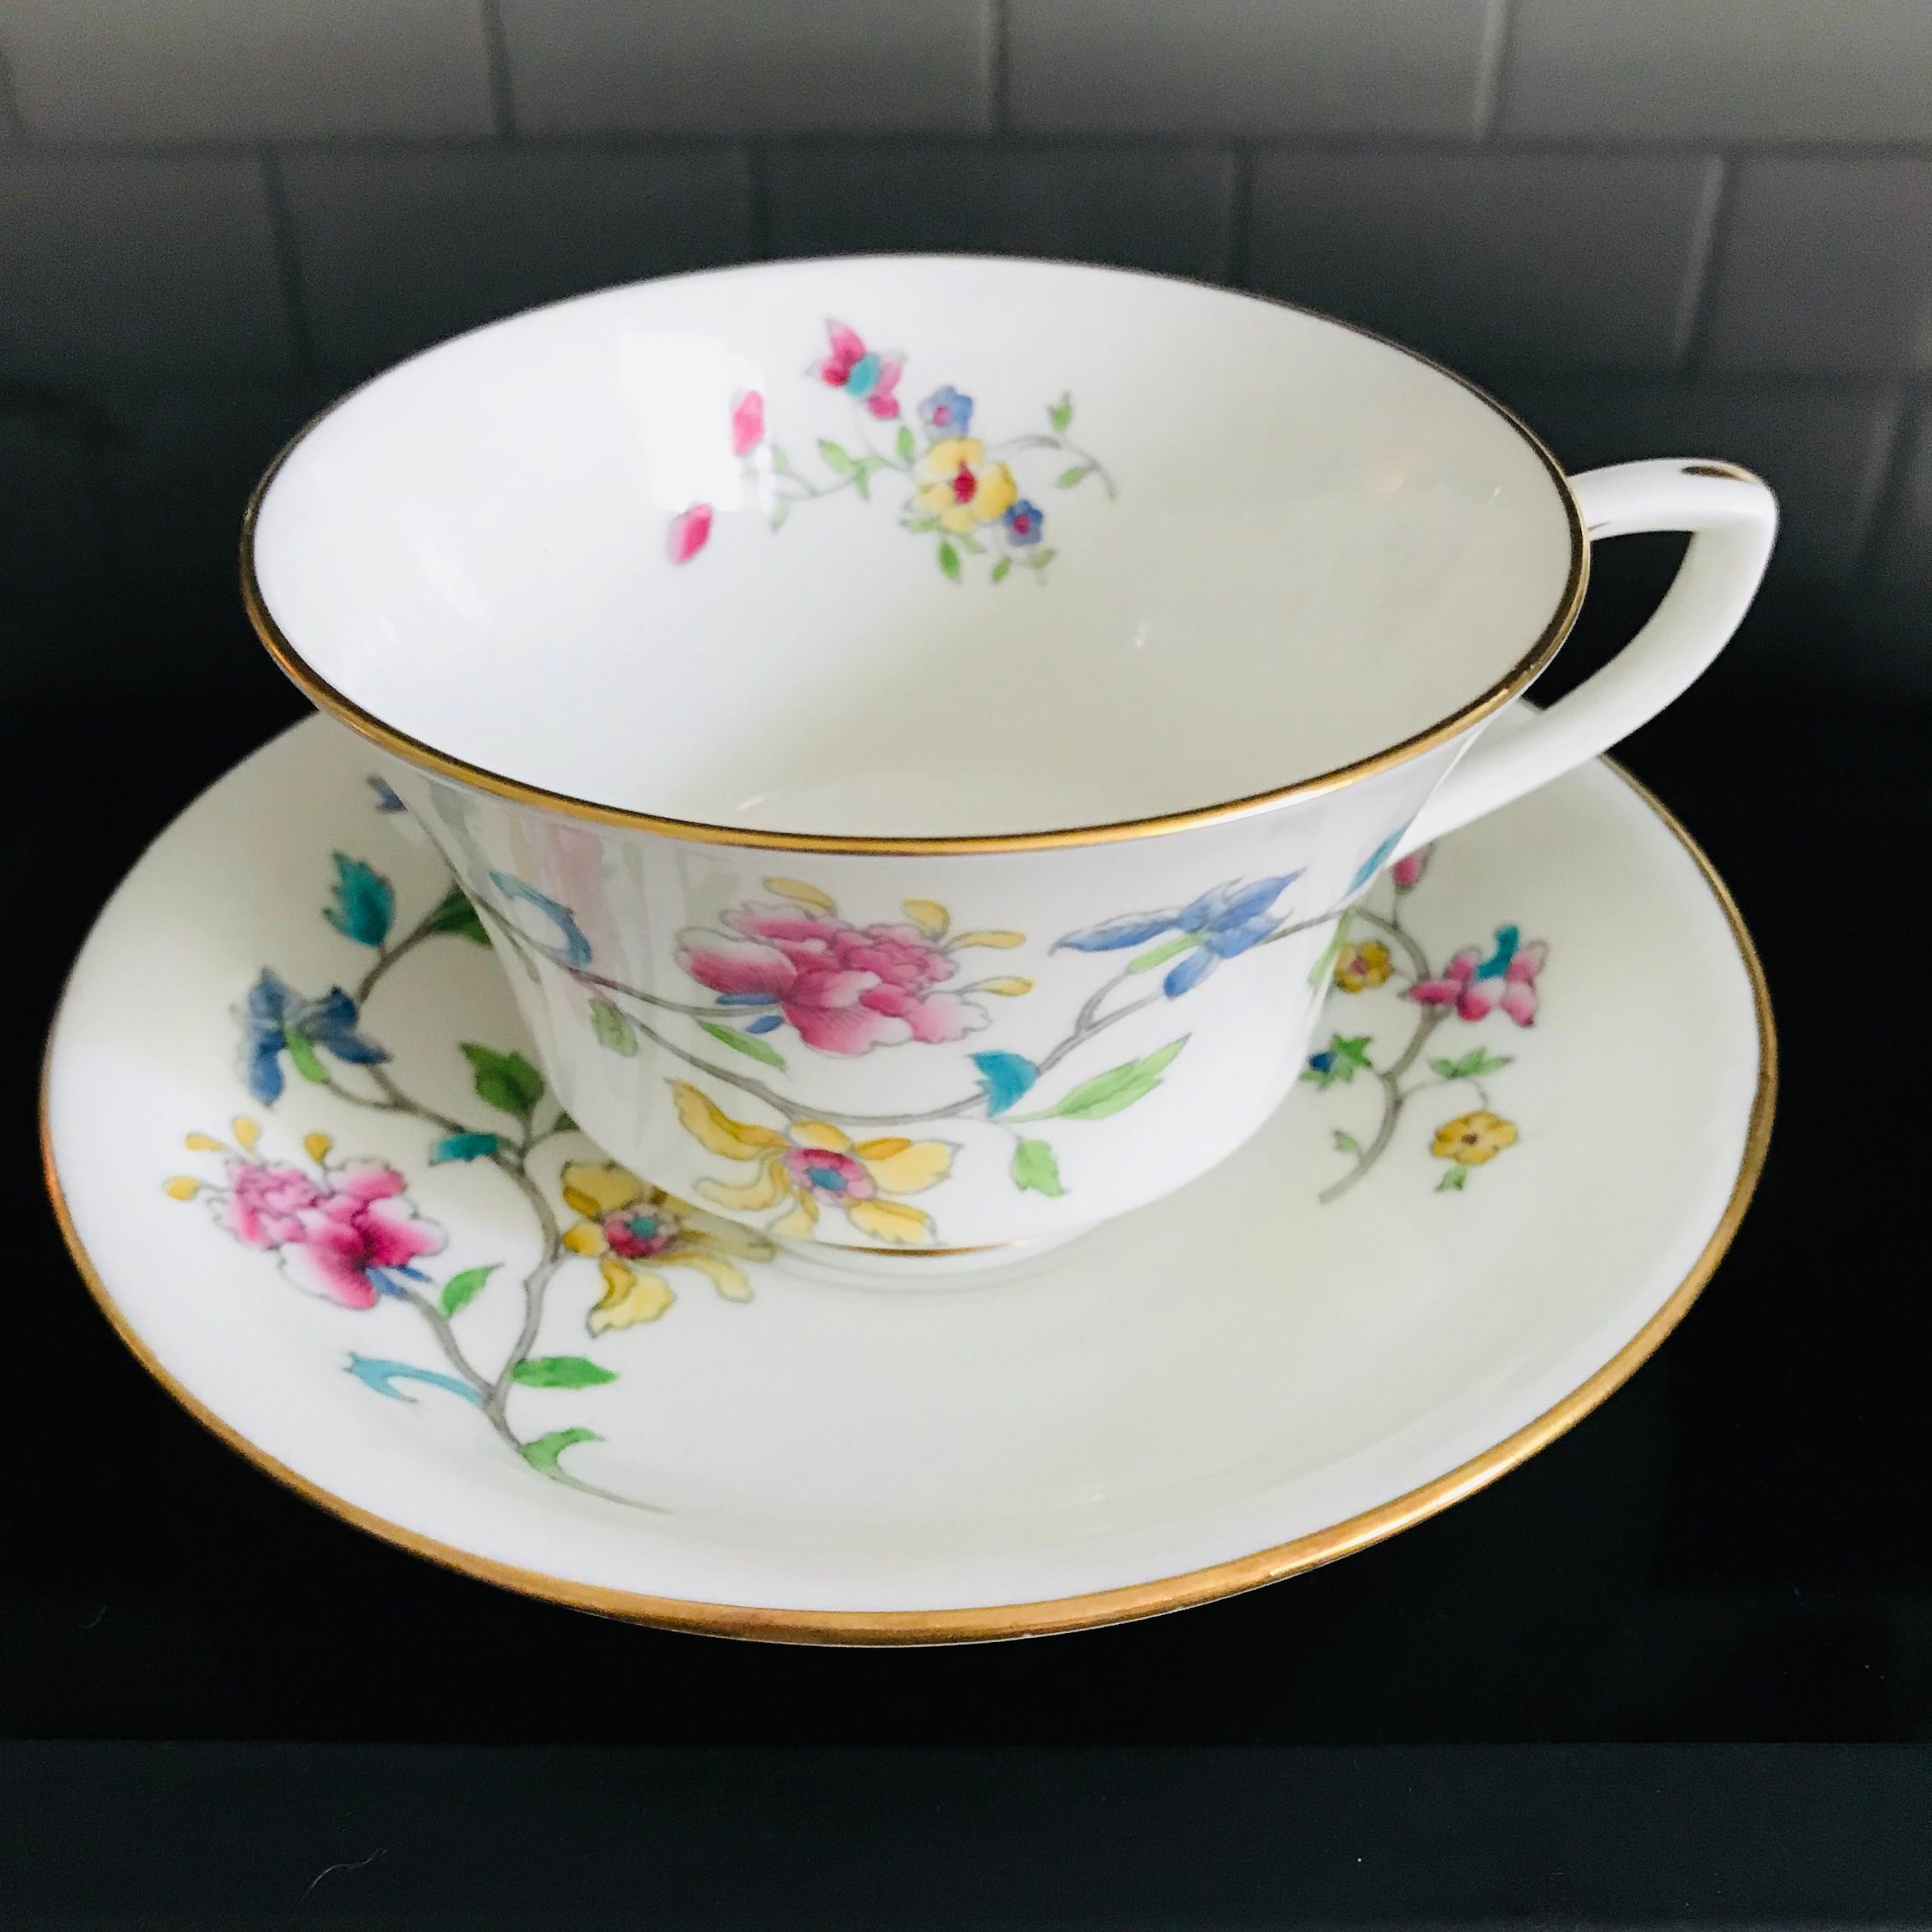 https://www.truevintageantiques.com/wp-content/uploads/2019/12/antique-royal-worcester-tea-cup-and-saucer-england-fine-china-bright-colors-aqua-yellow-pink-blue-collectible-display-farmhouse-cottage-5e0573f01-scaled.jpg